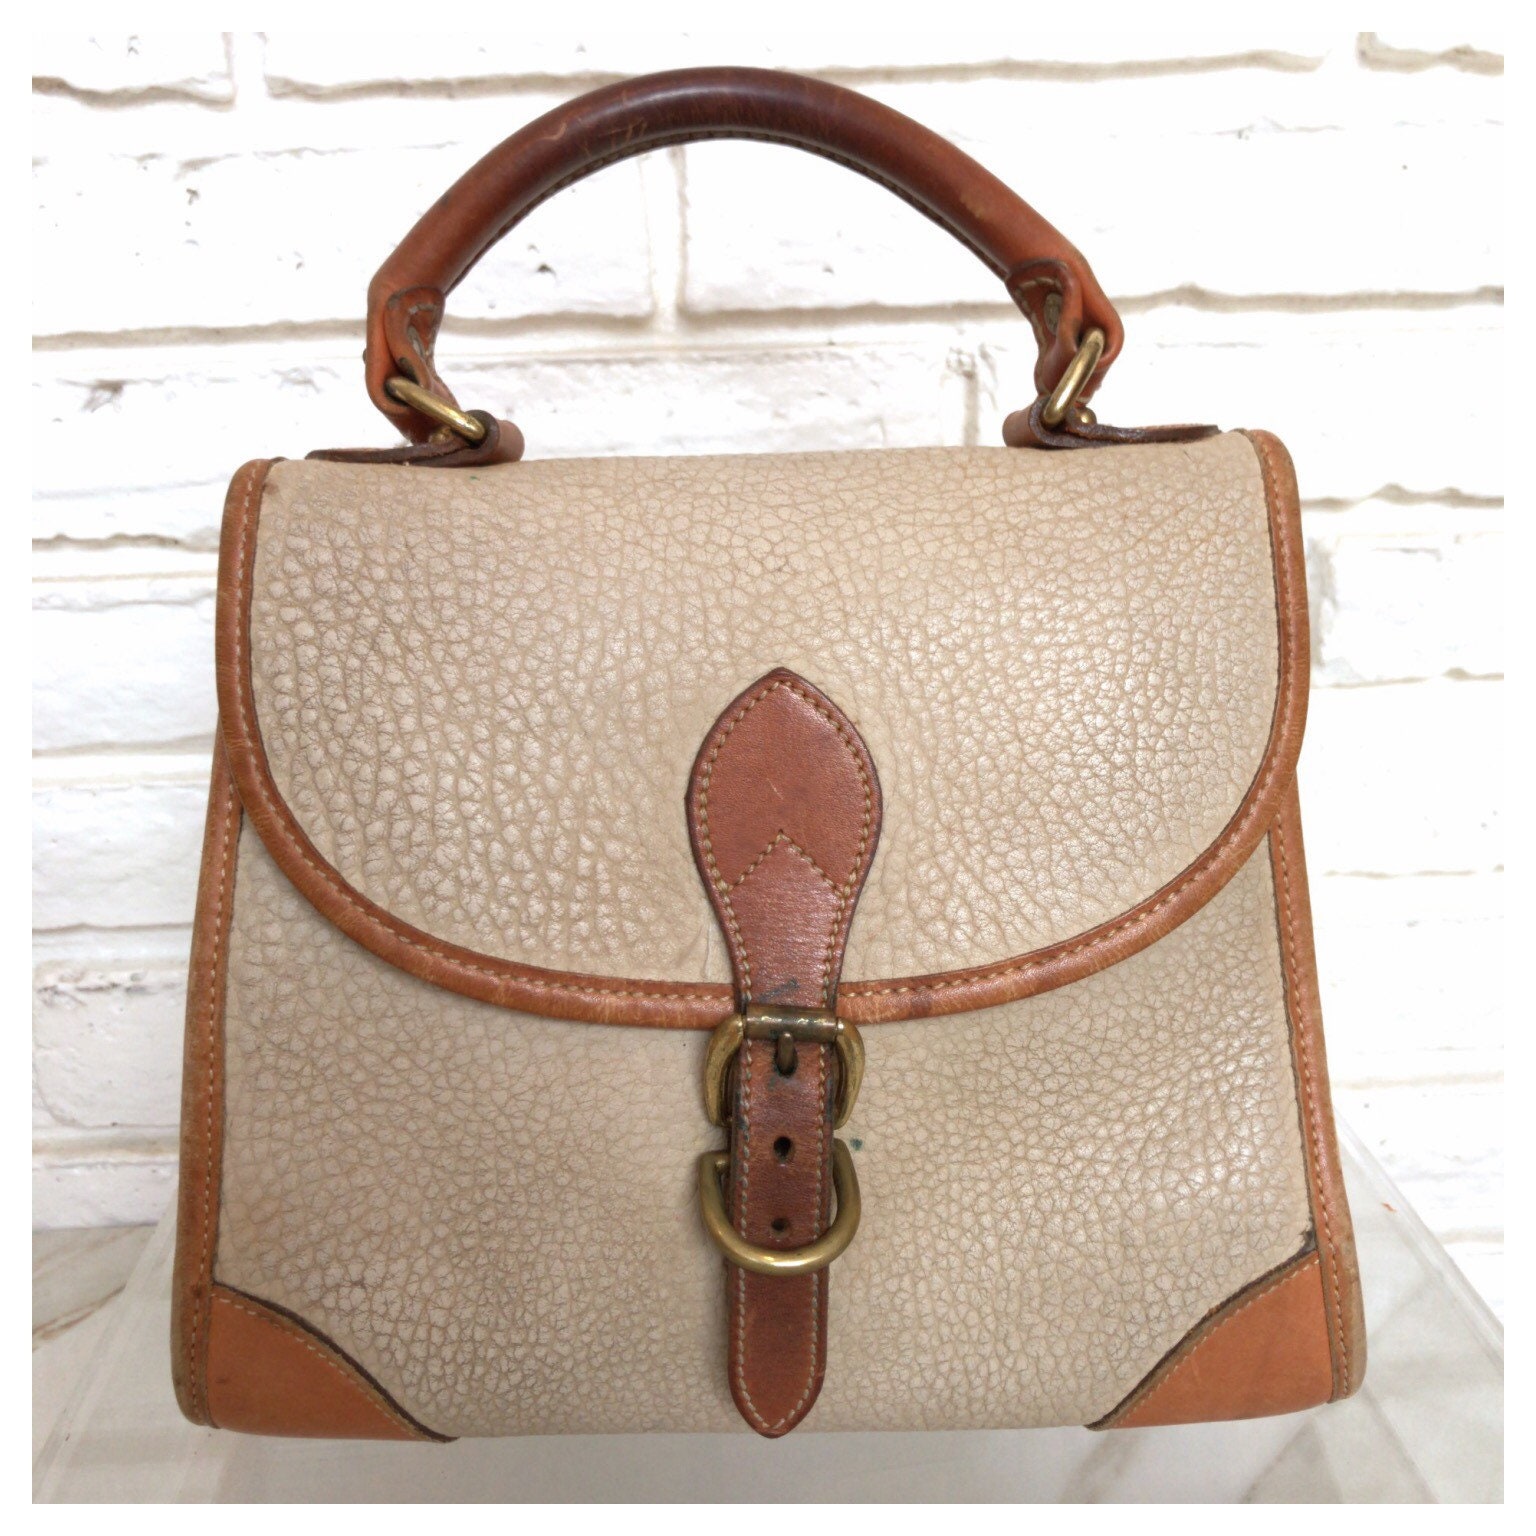 Vintage Dooney & Bourke Small Top Handle Purse Handbag Made in USA Beige And Tan Leather